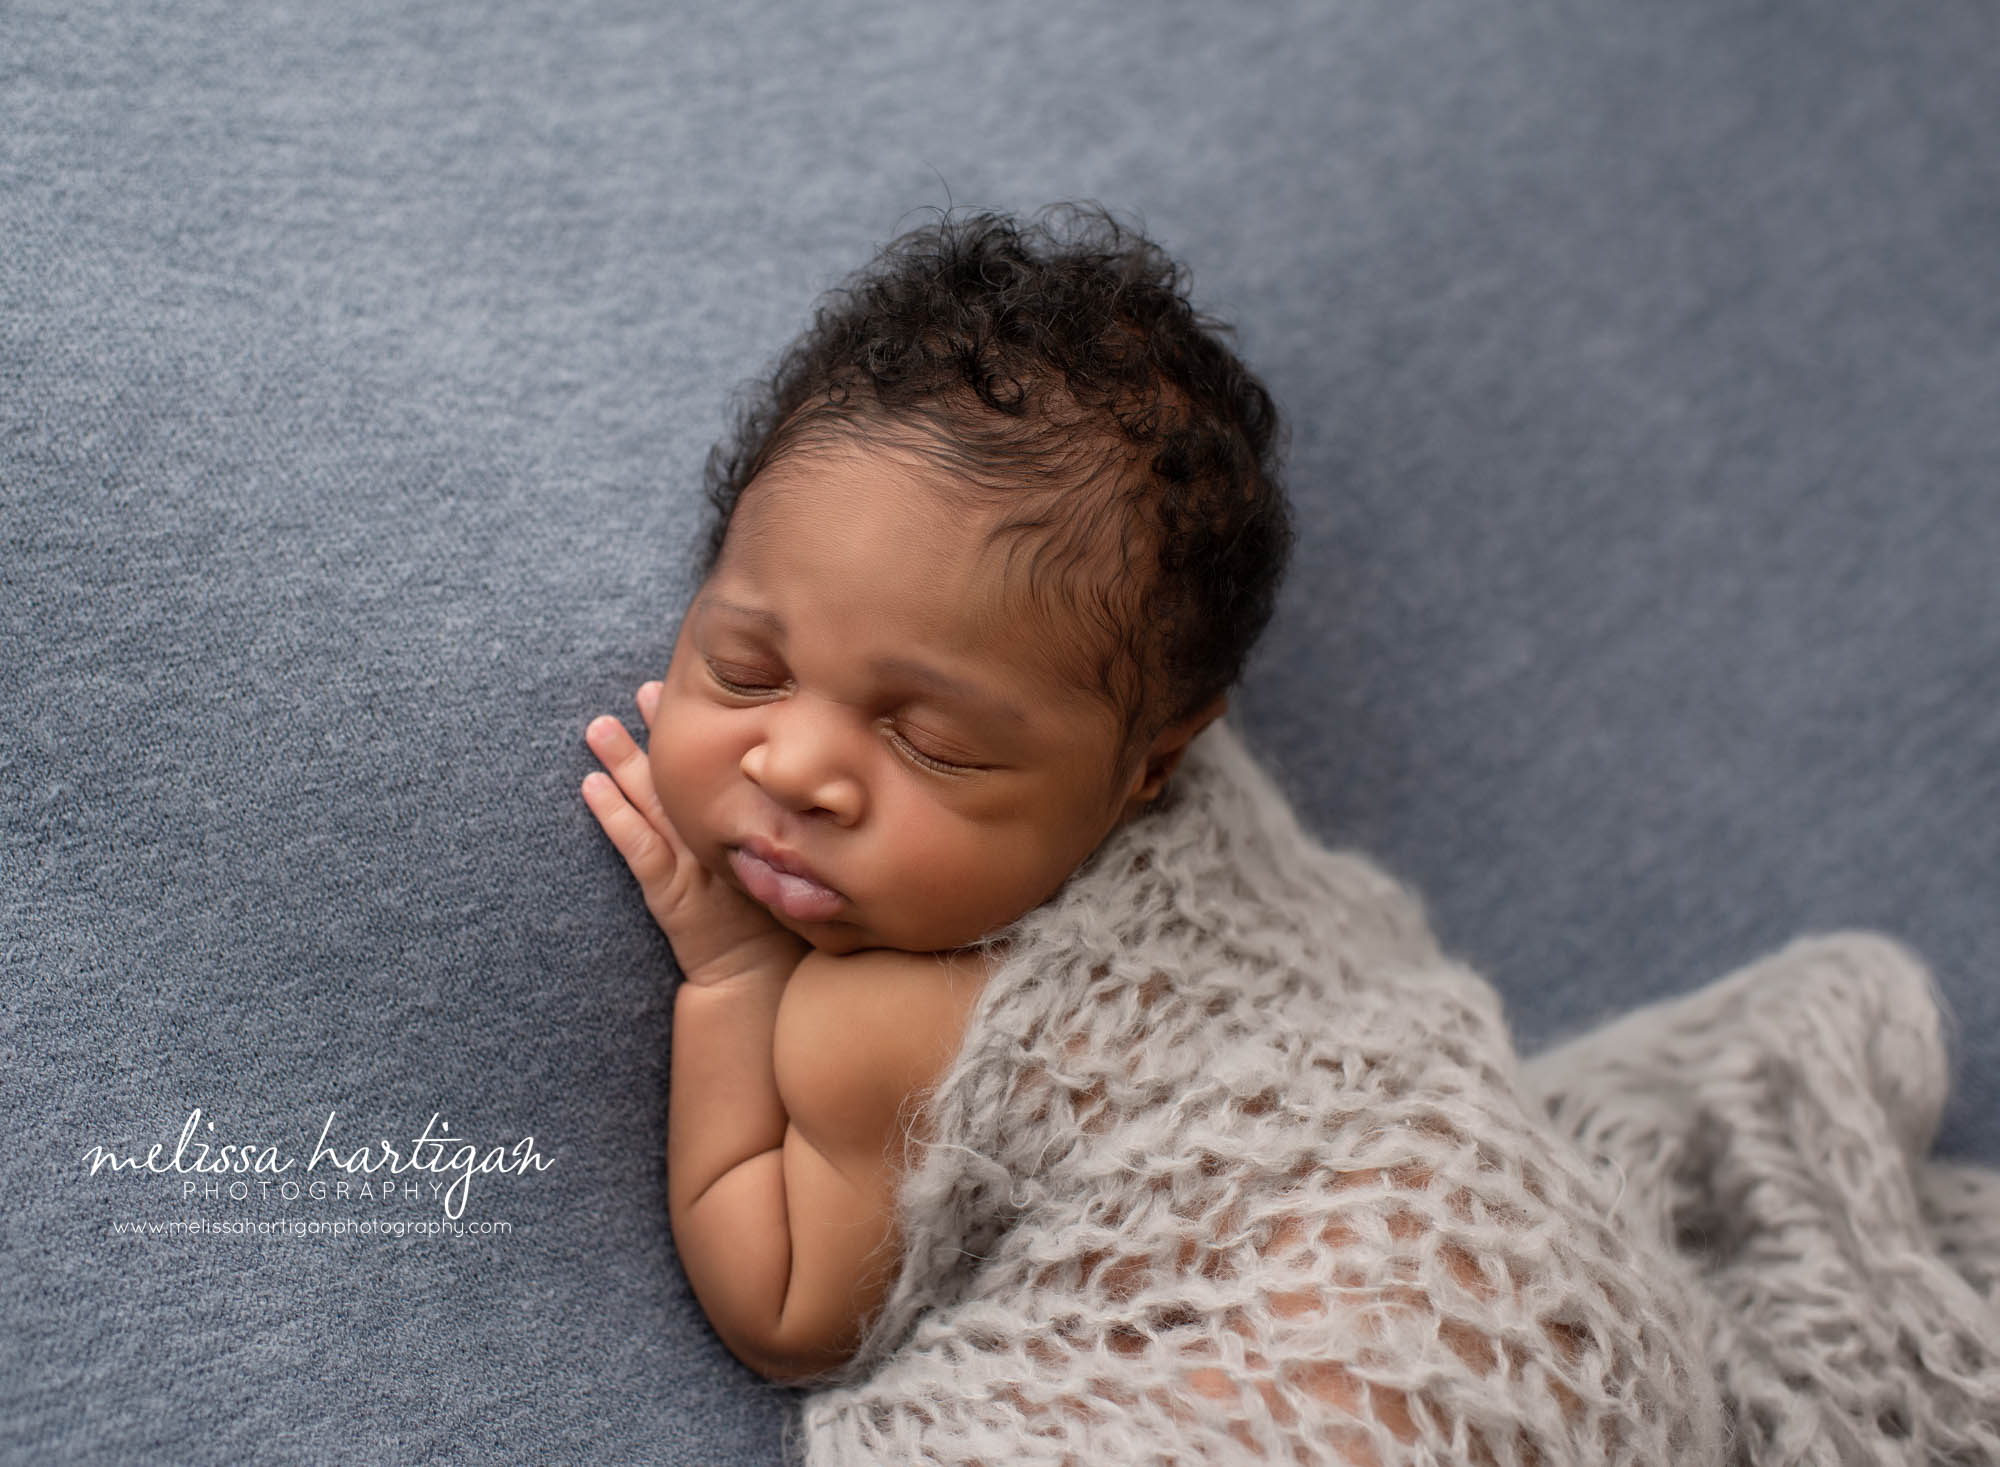 newborn baby boy posed on side with gray knitted wrap layered over back newborn photography windsor CT